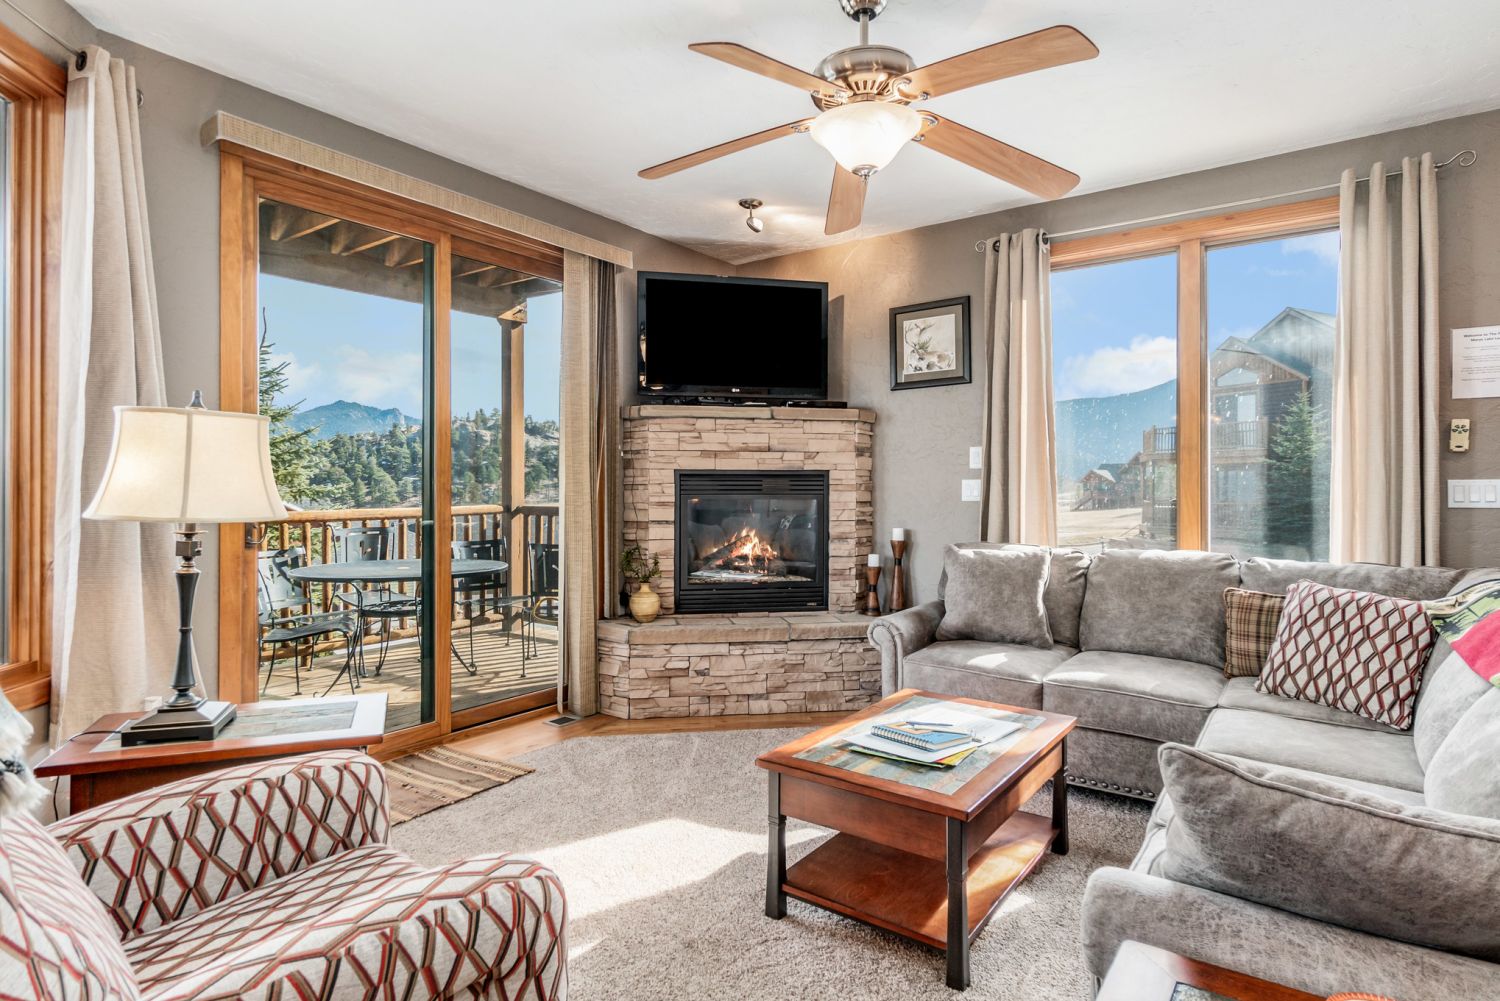 Mount Cirrus 10B - Large living room with oversized chair and L shaped sofa. Flat screen TV with gas fireplace and panoramic views out the sliding glass doors. 